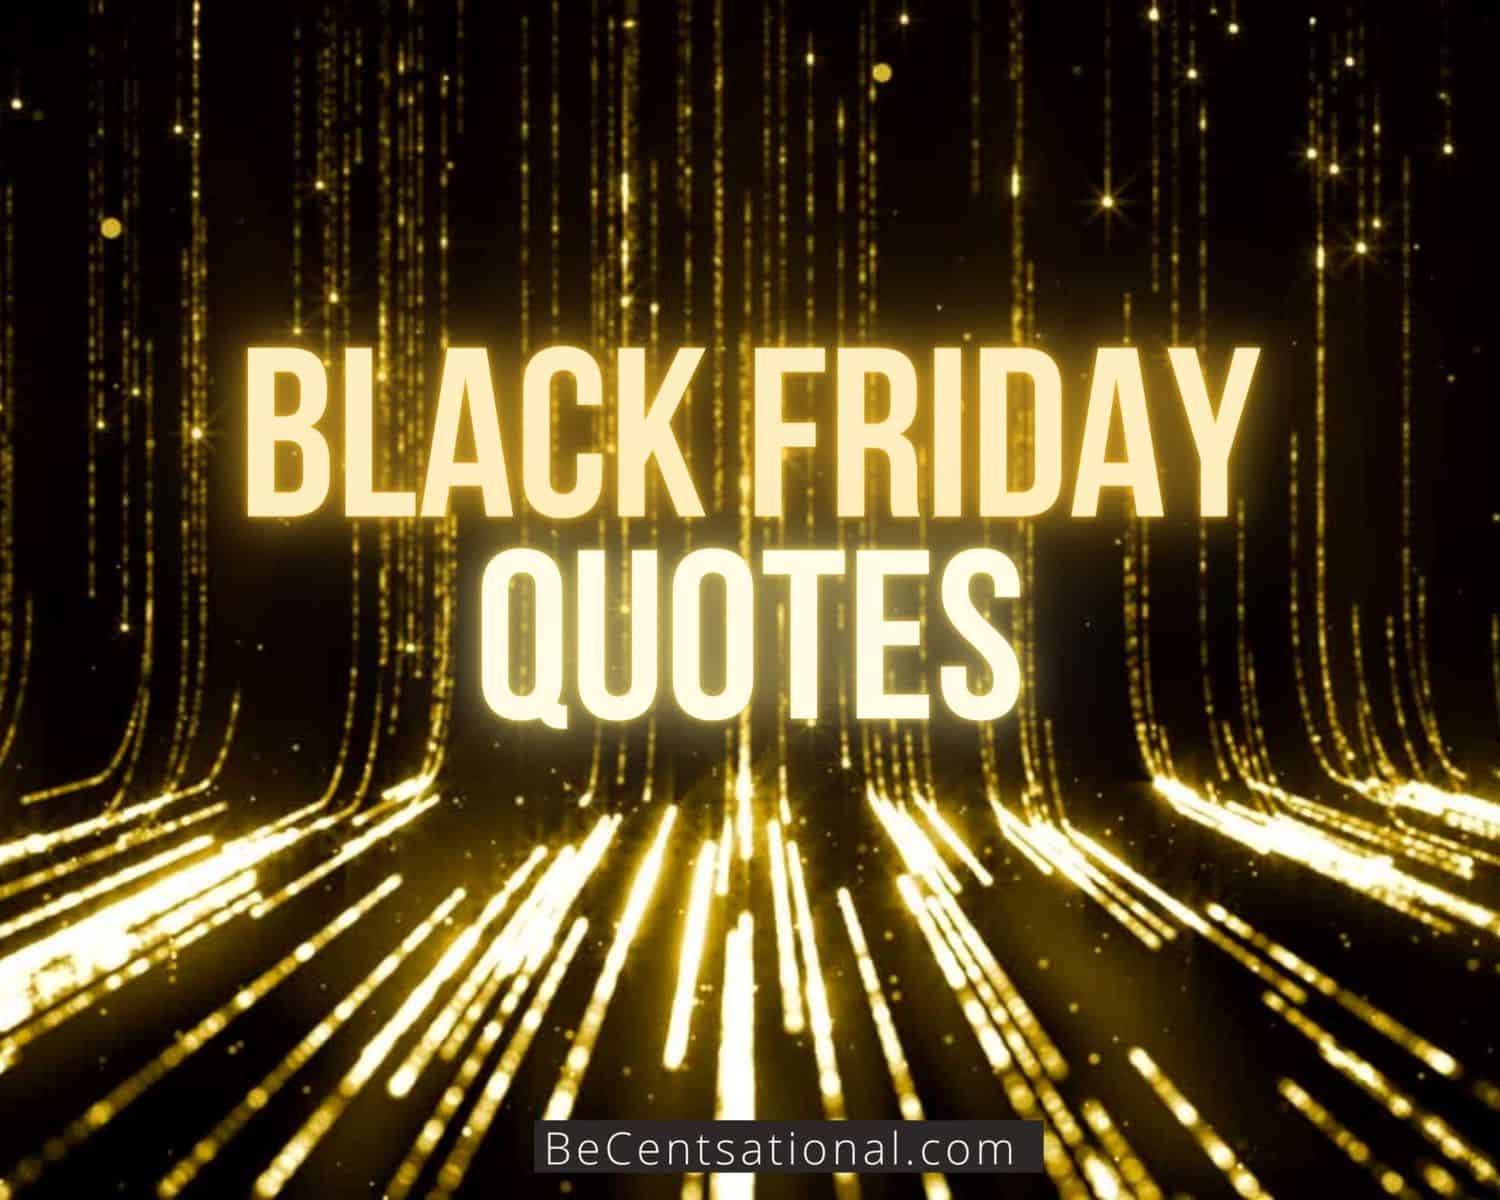 Black friday quotes